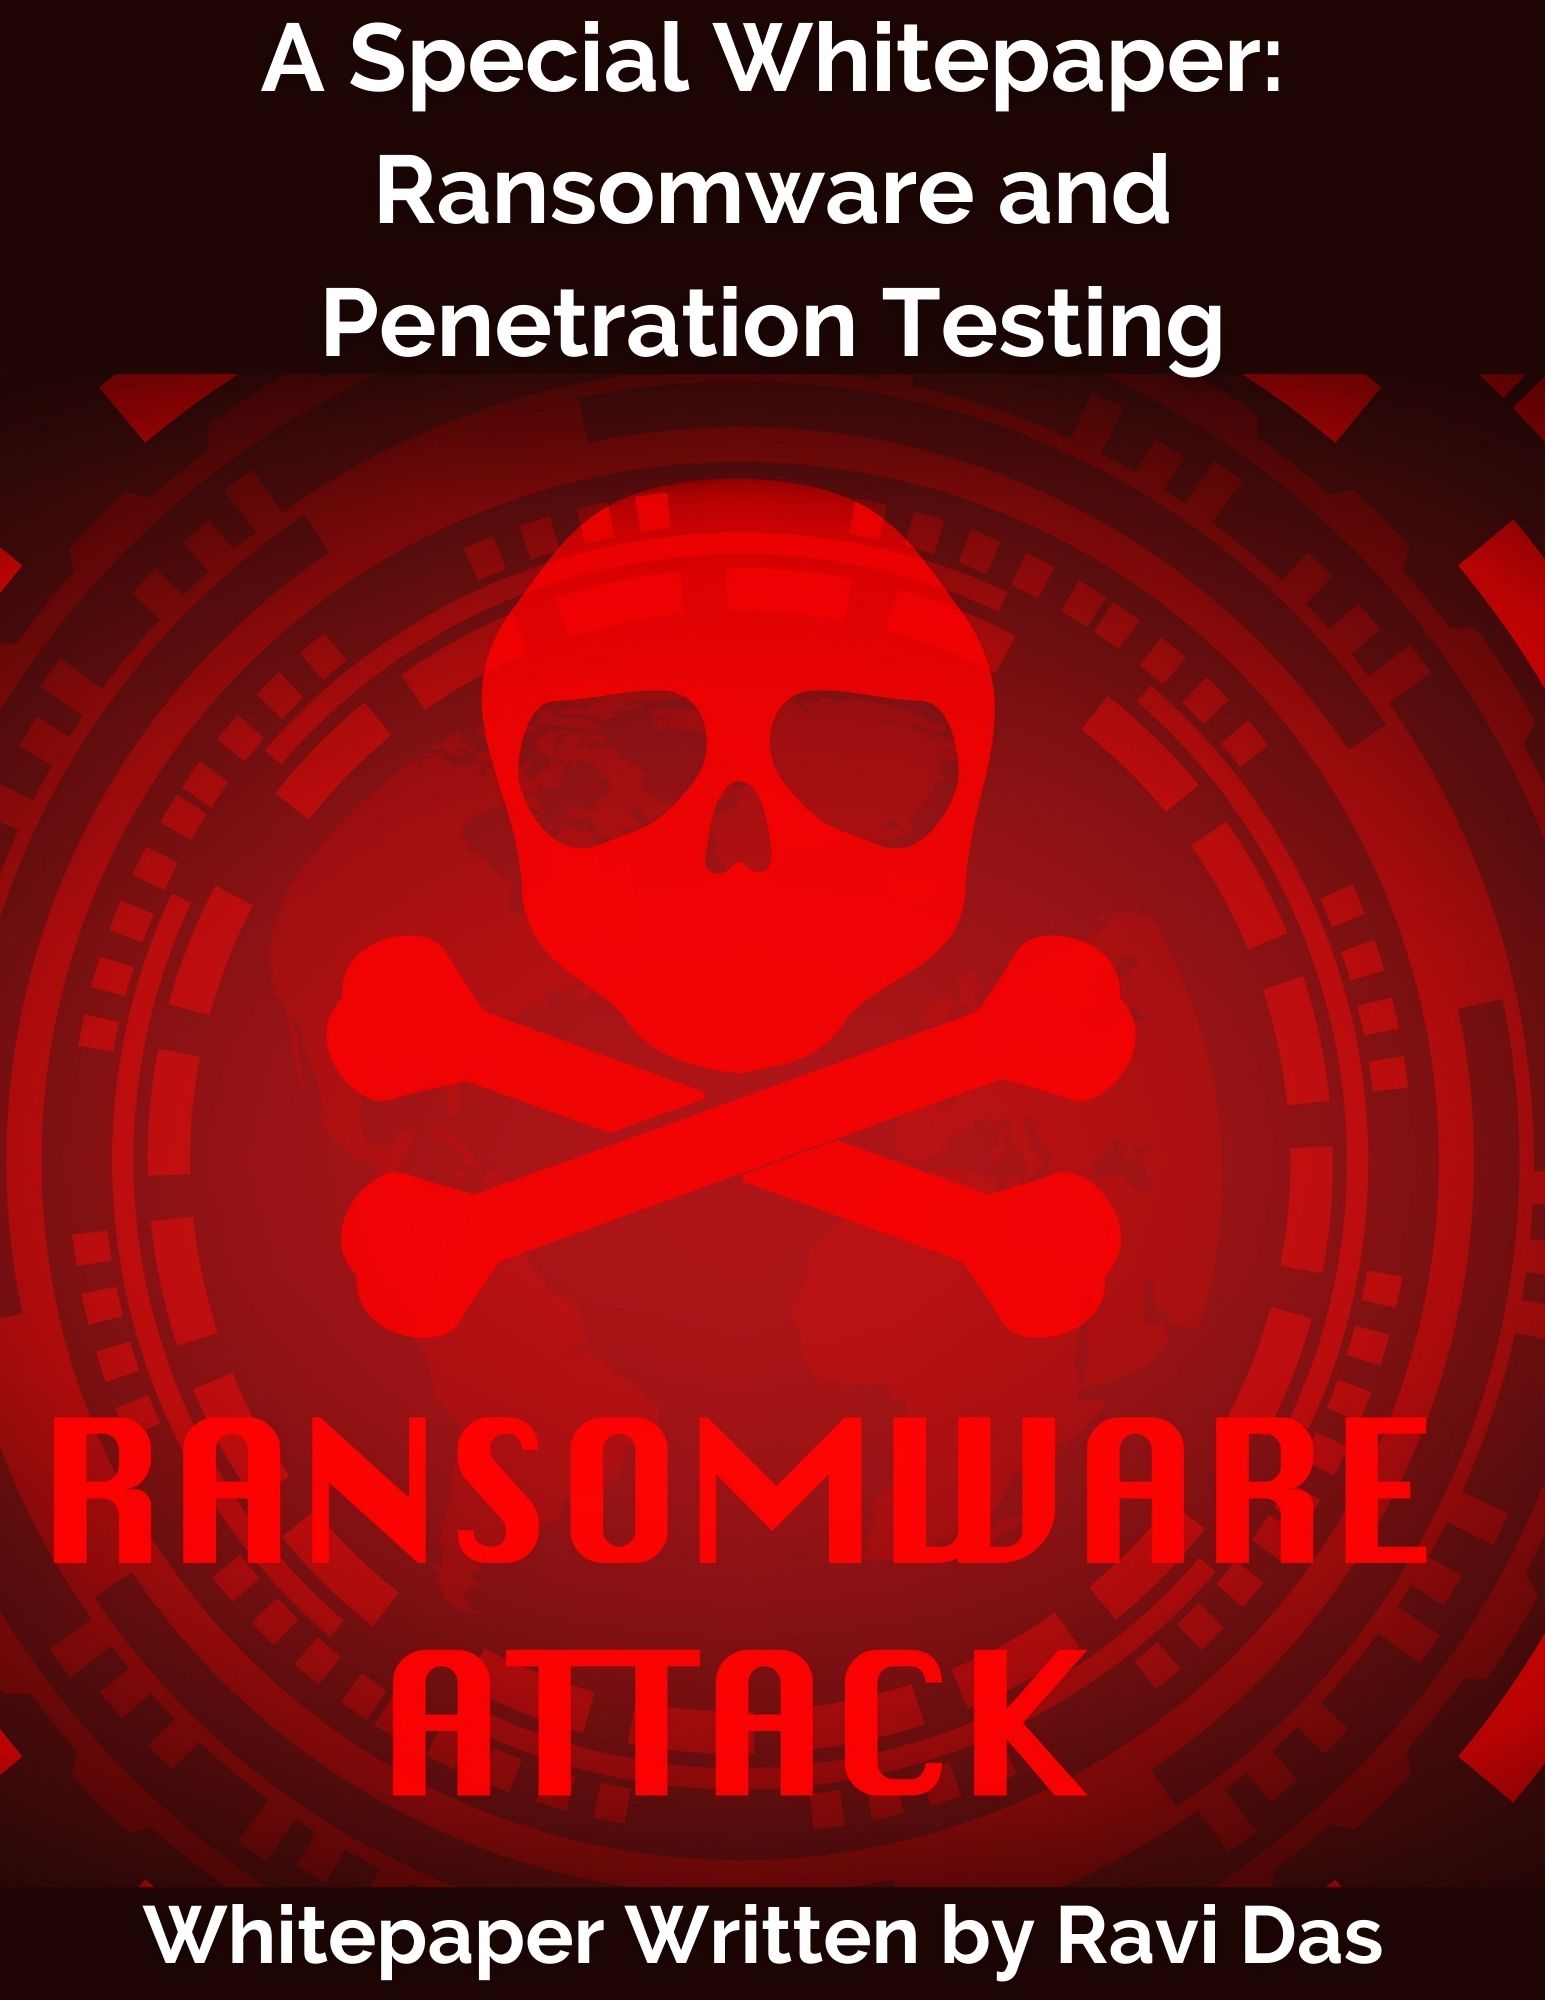 A Special Whitepaper: Ransomware and Penetration Testing